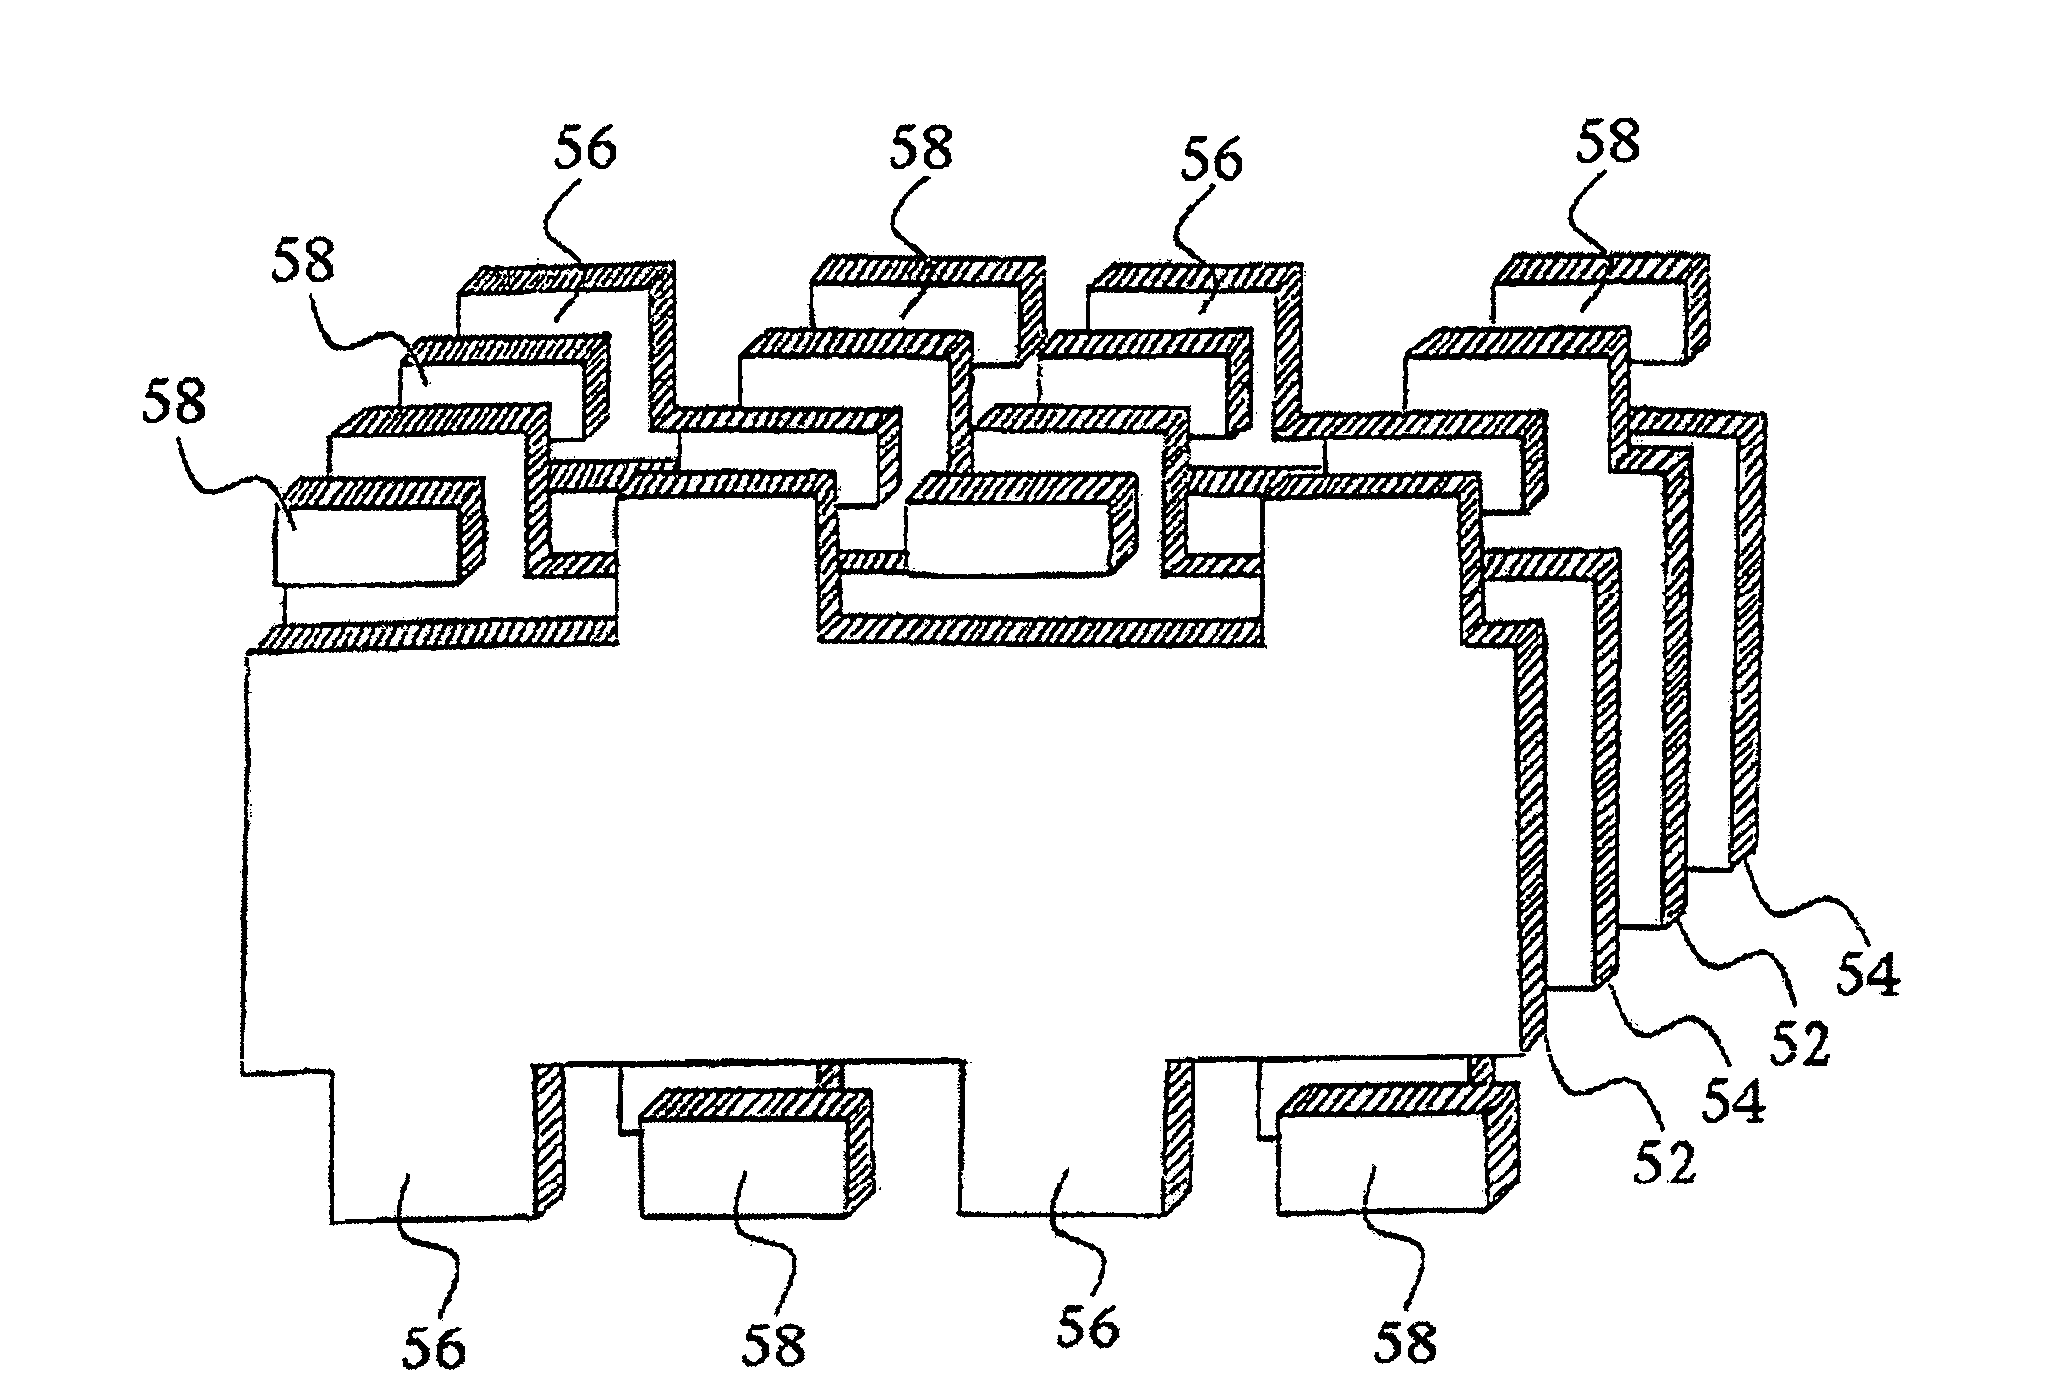 Plated terminations and method of forming using electrolytic plating